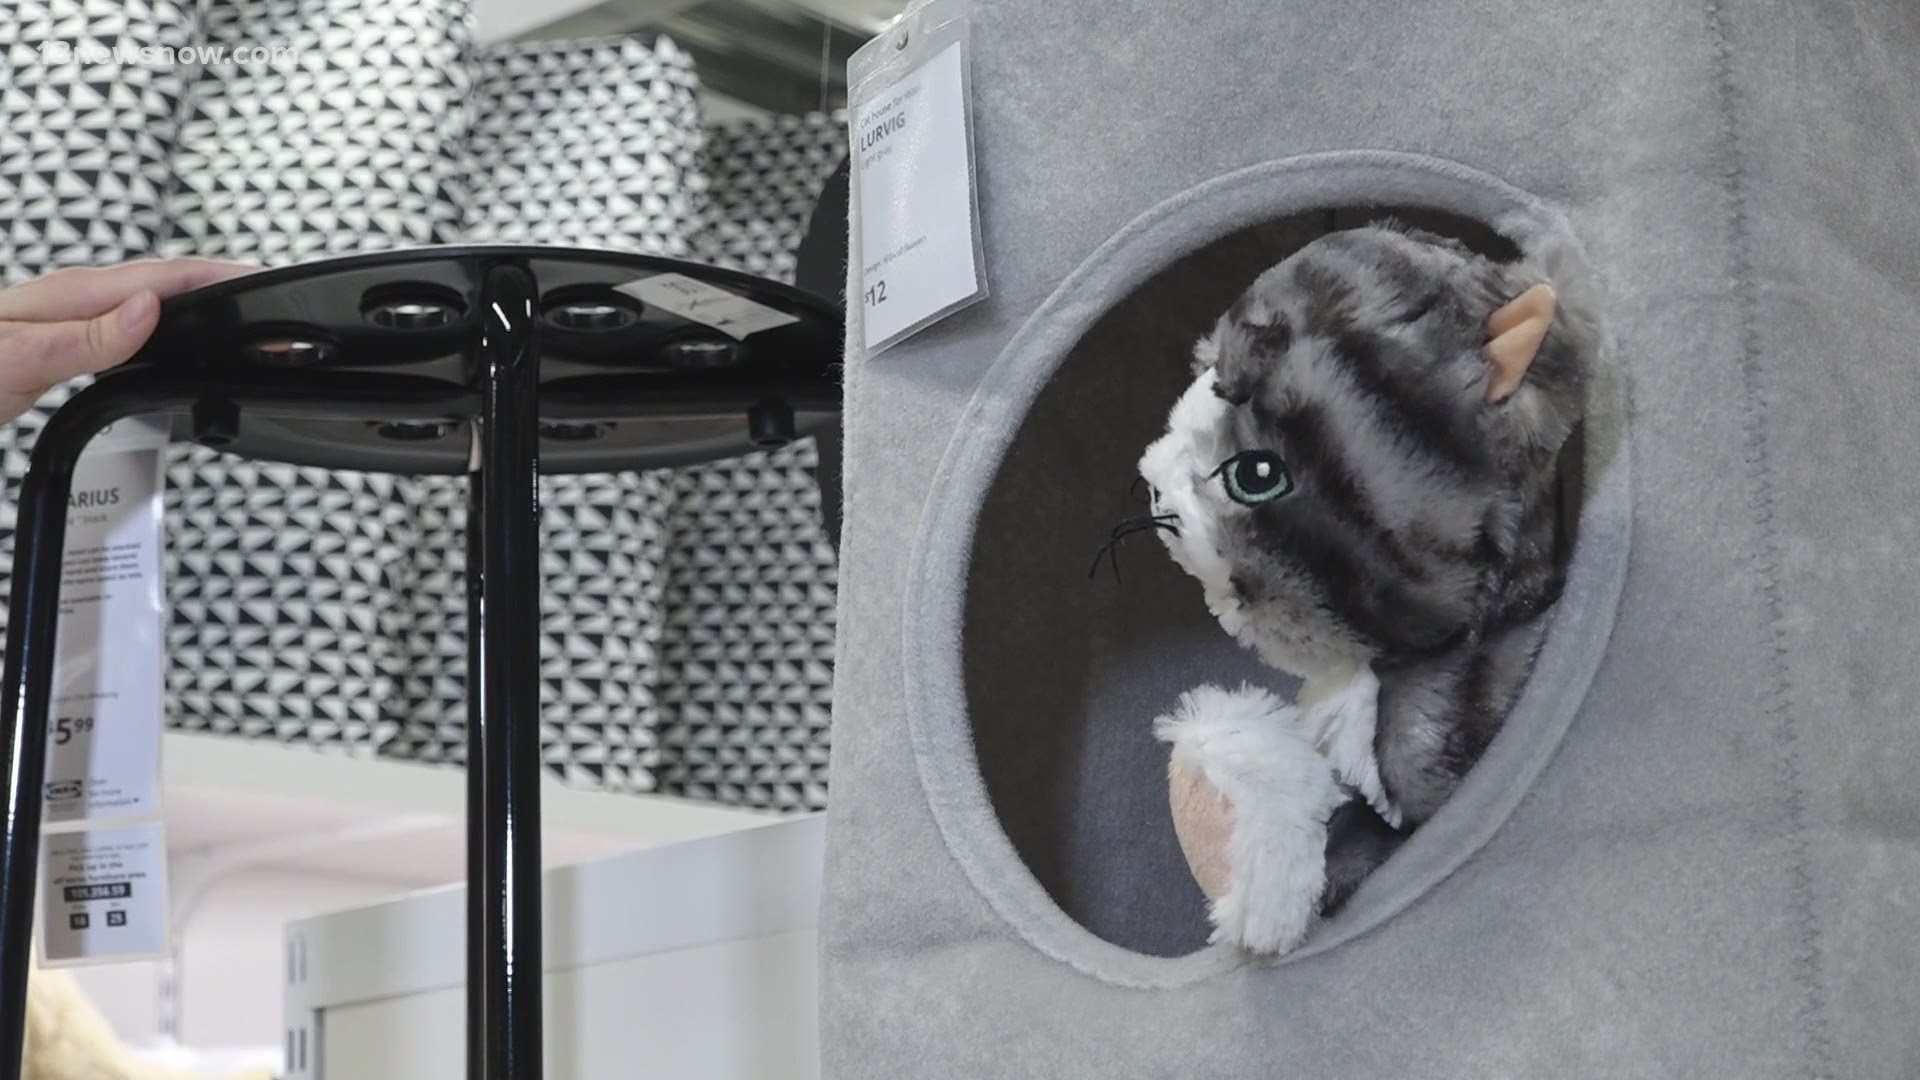 A whole line of IKEA furniture designed just for your pets.